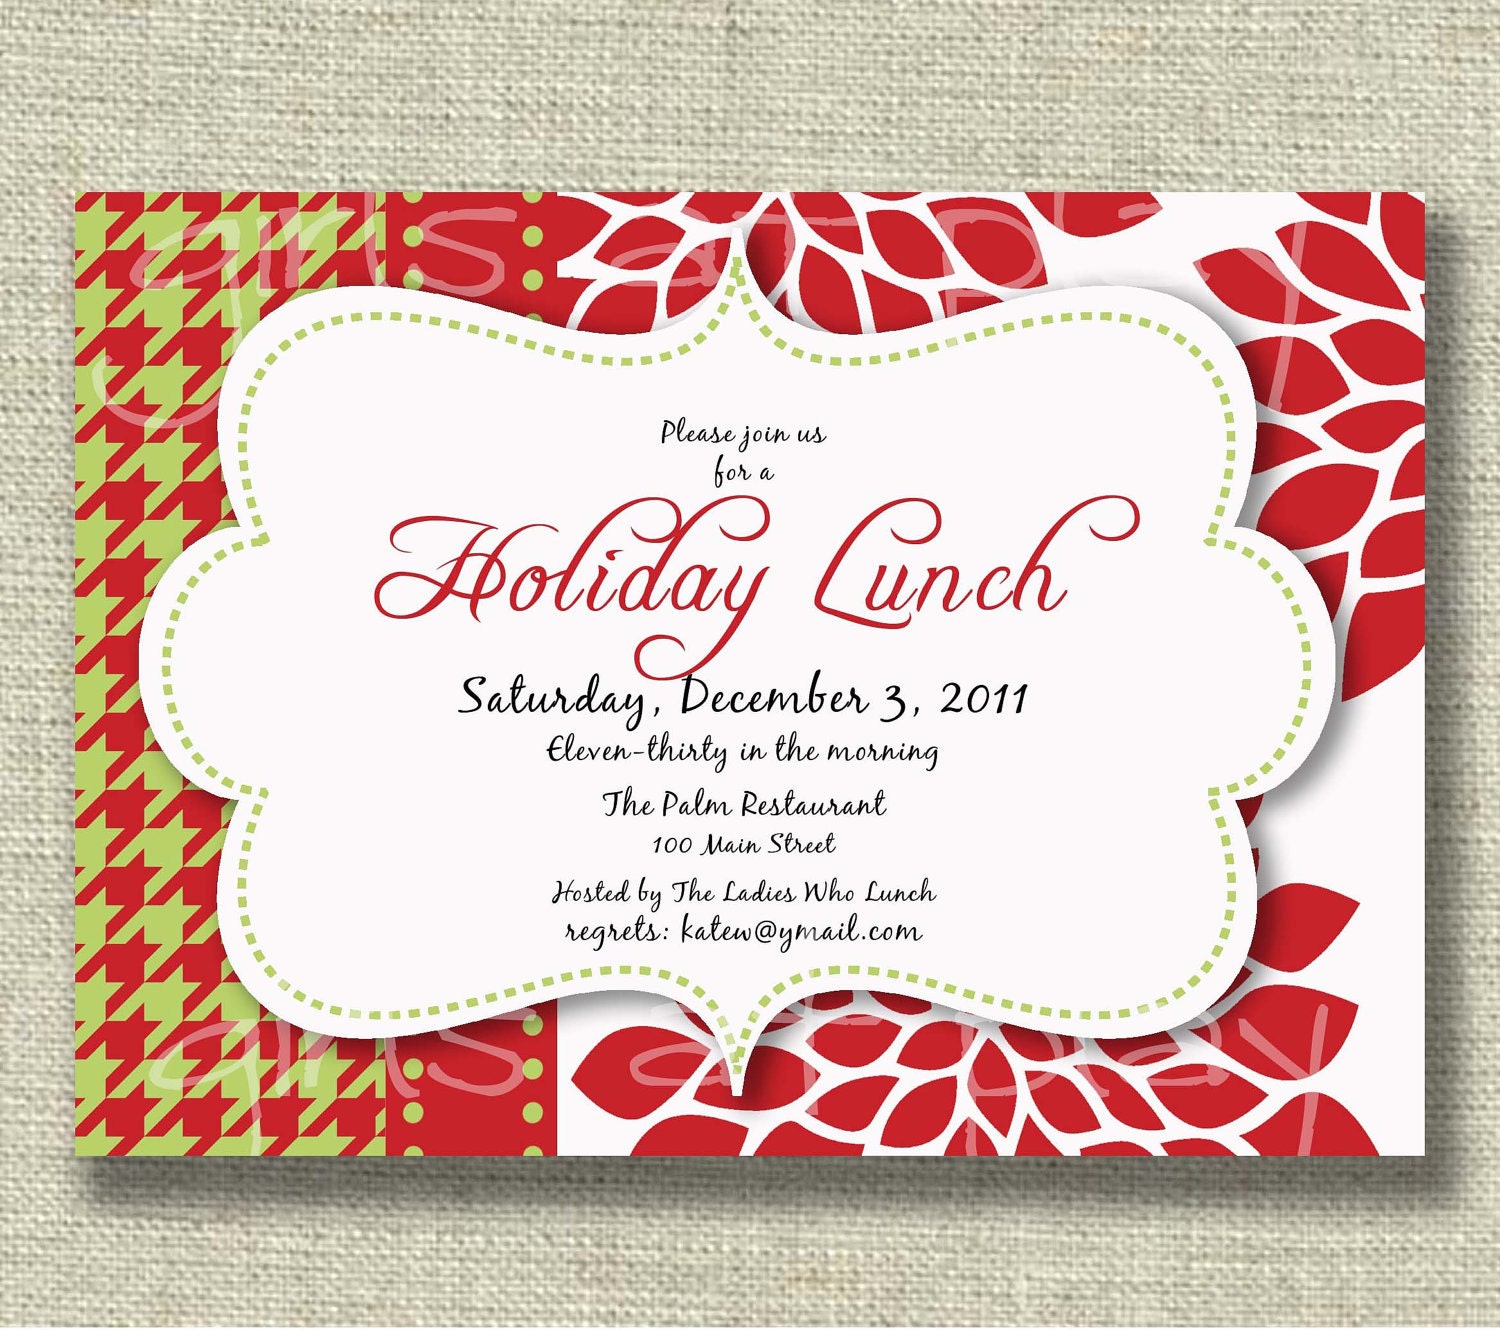 Christmas Lunch Invitation Template Free 4